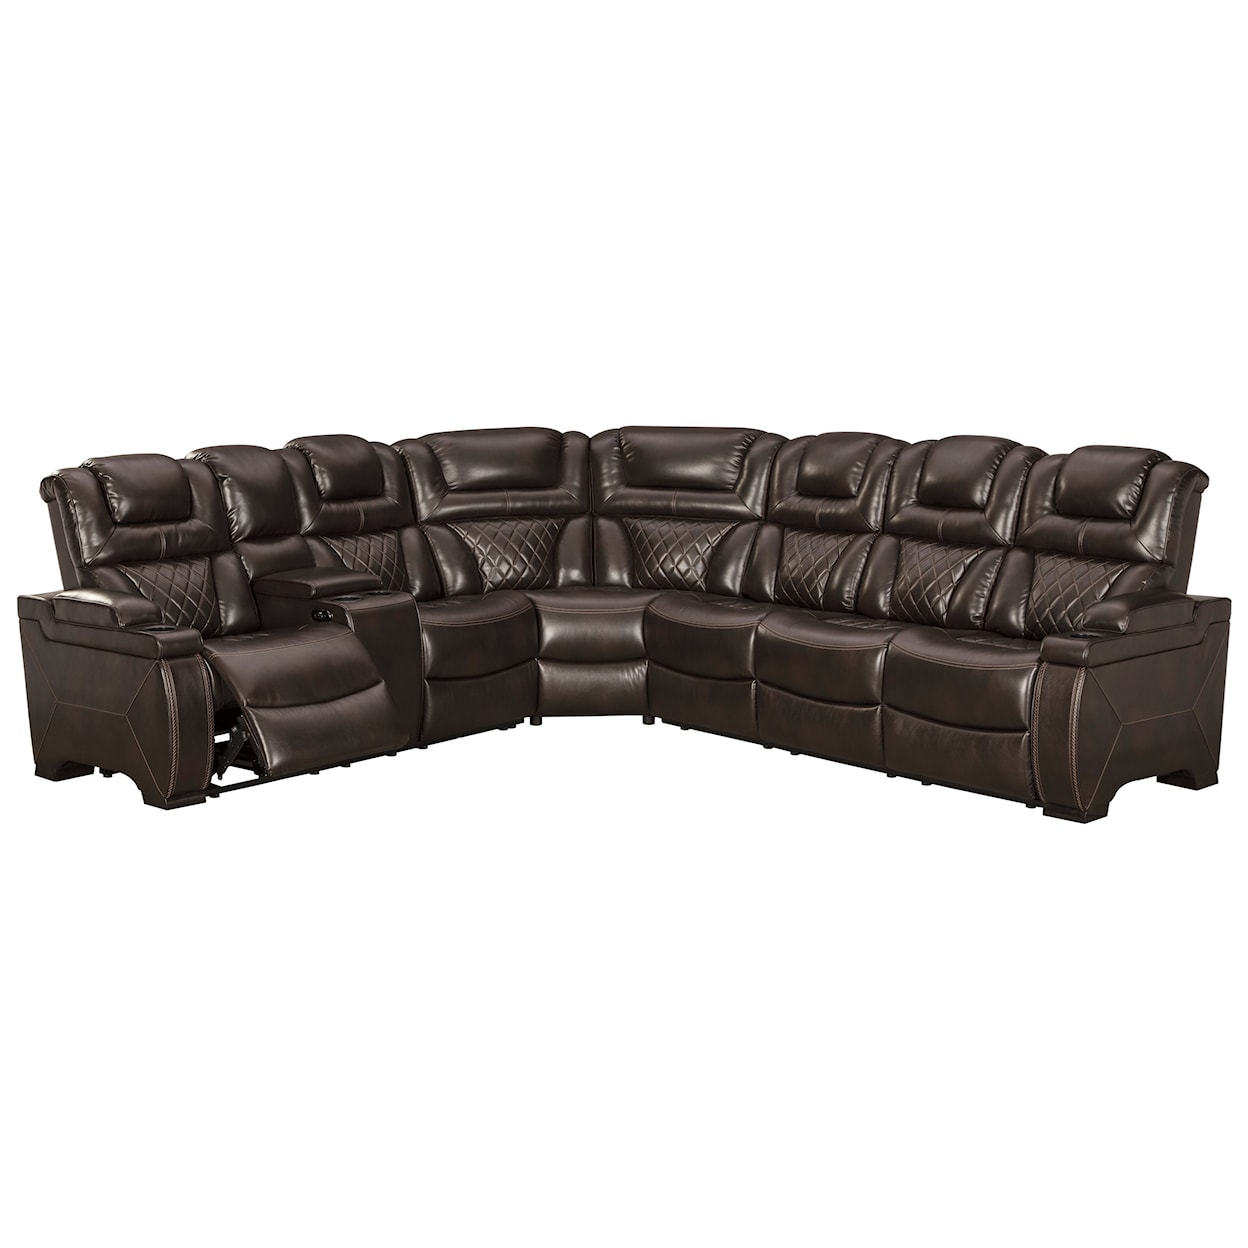 Signature Design by Ashley Warnerton Power Reclining Sectional